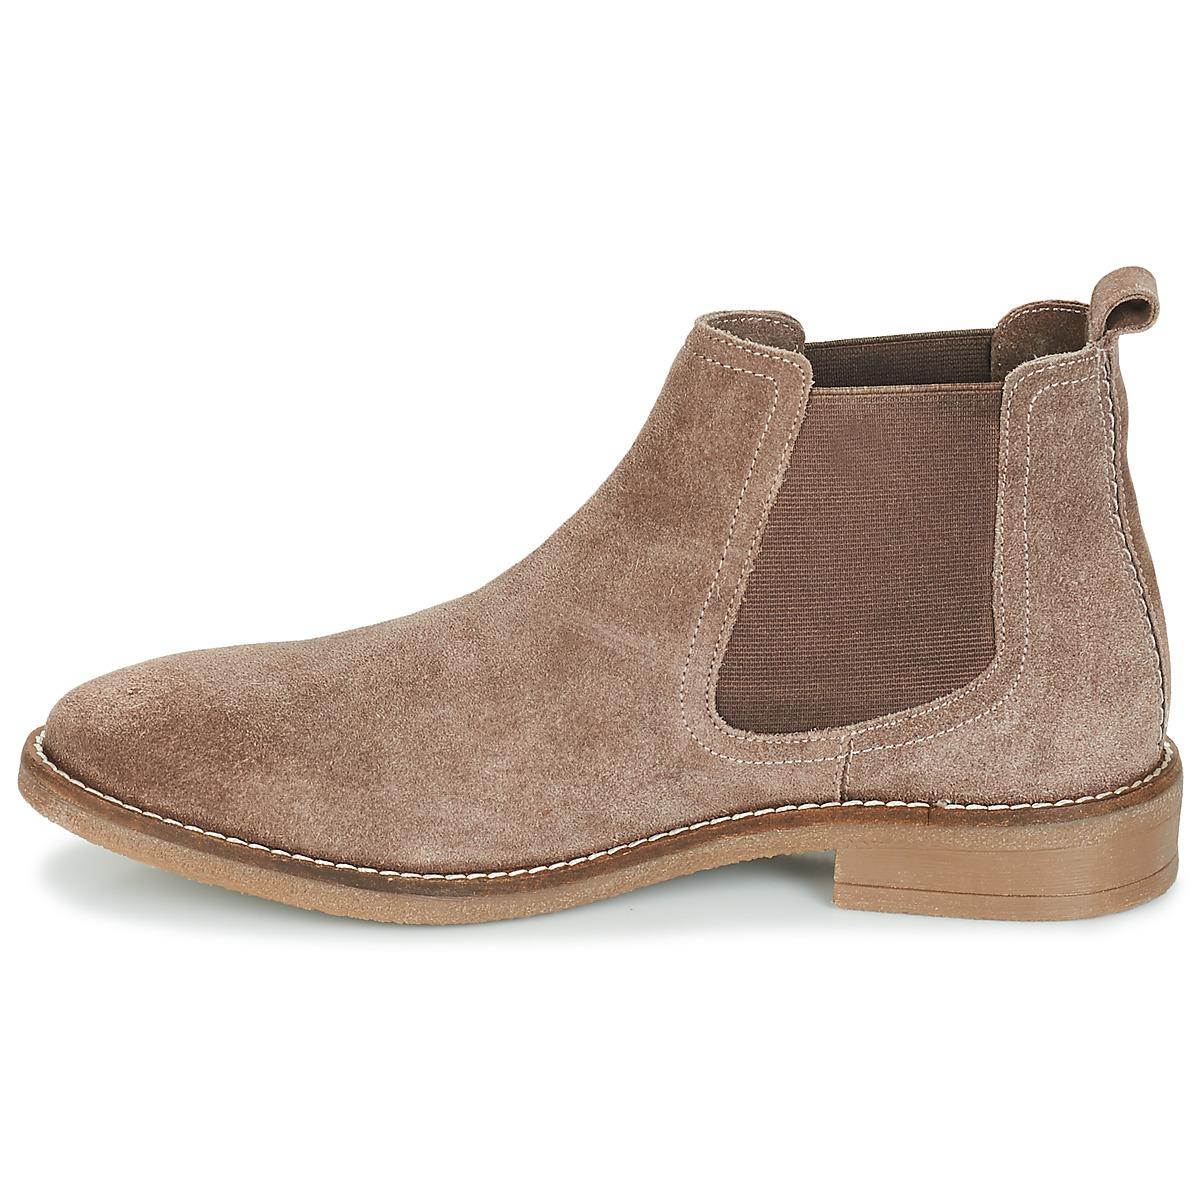 Whitfield Chelsea Boots Luxembourg, SAVE 40% - mpgc.net